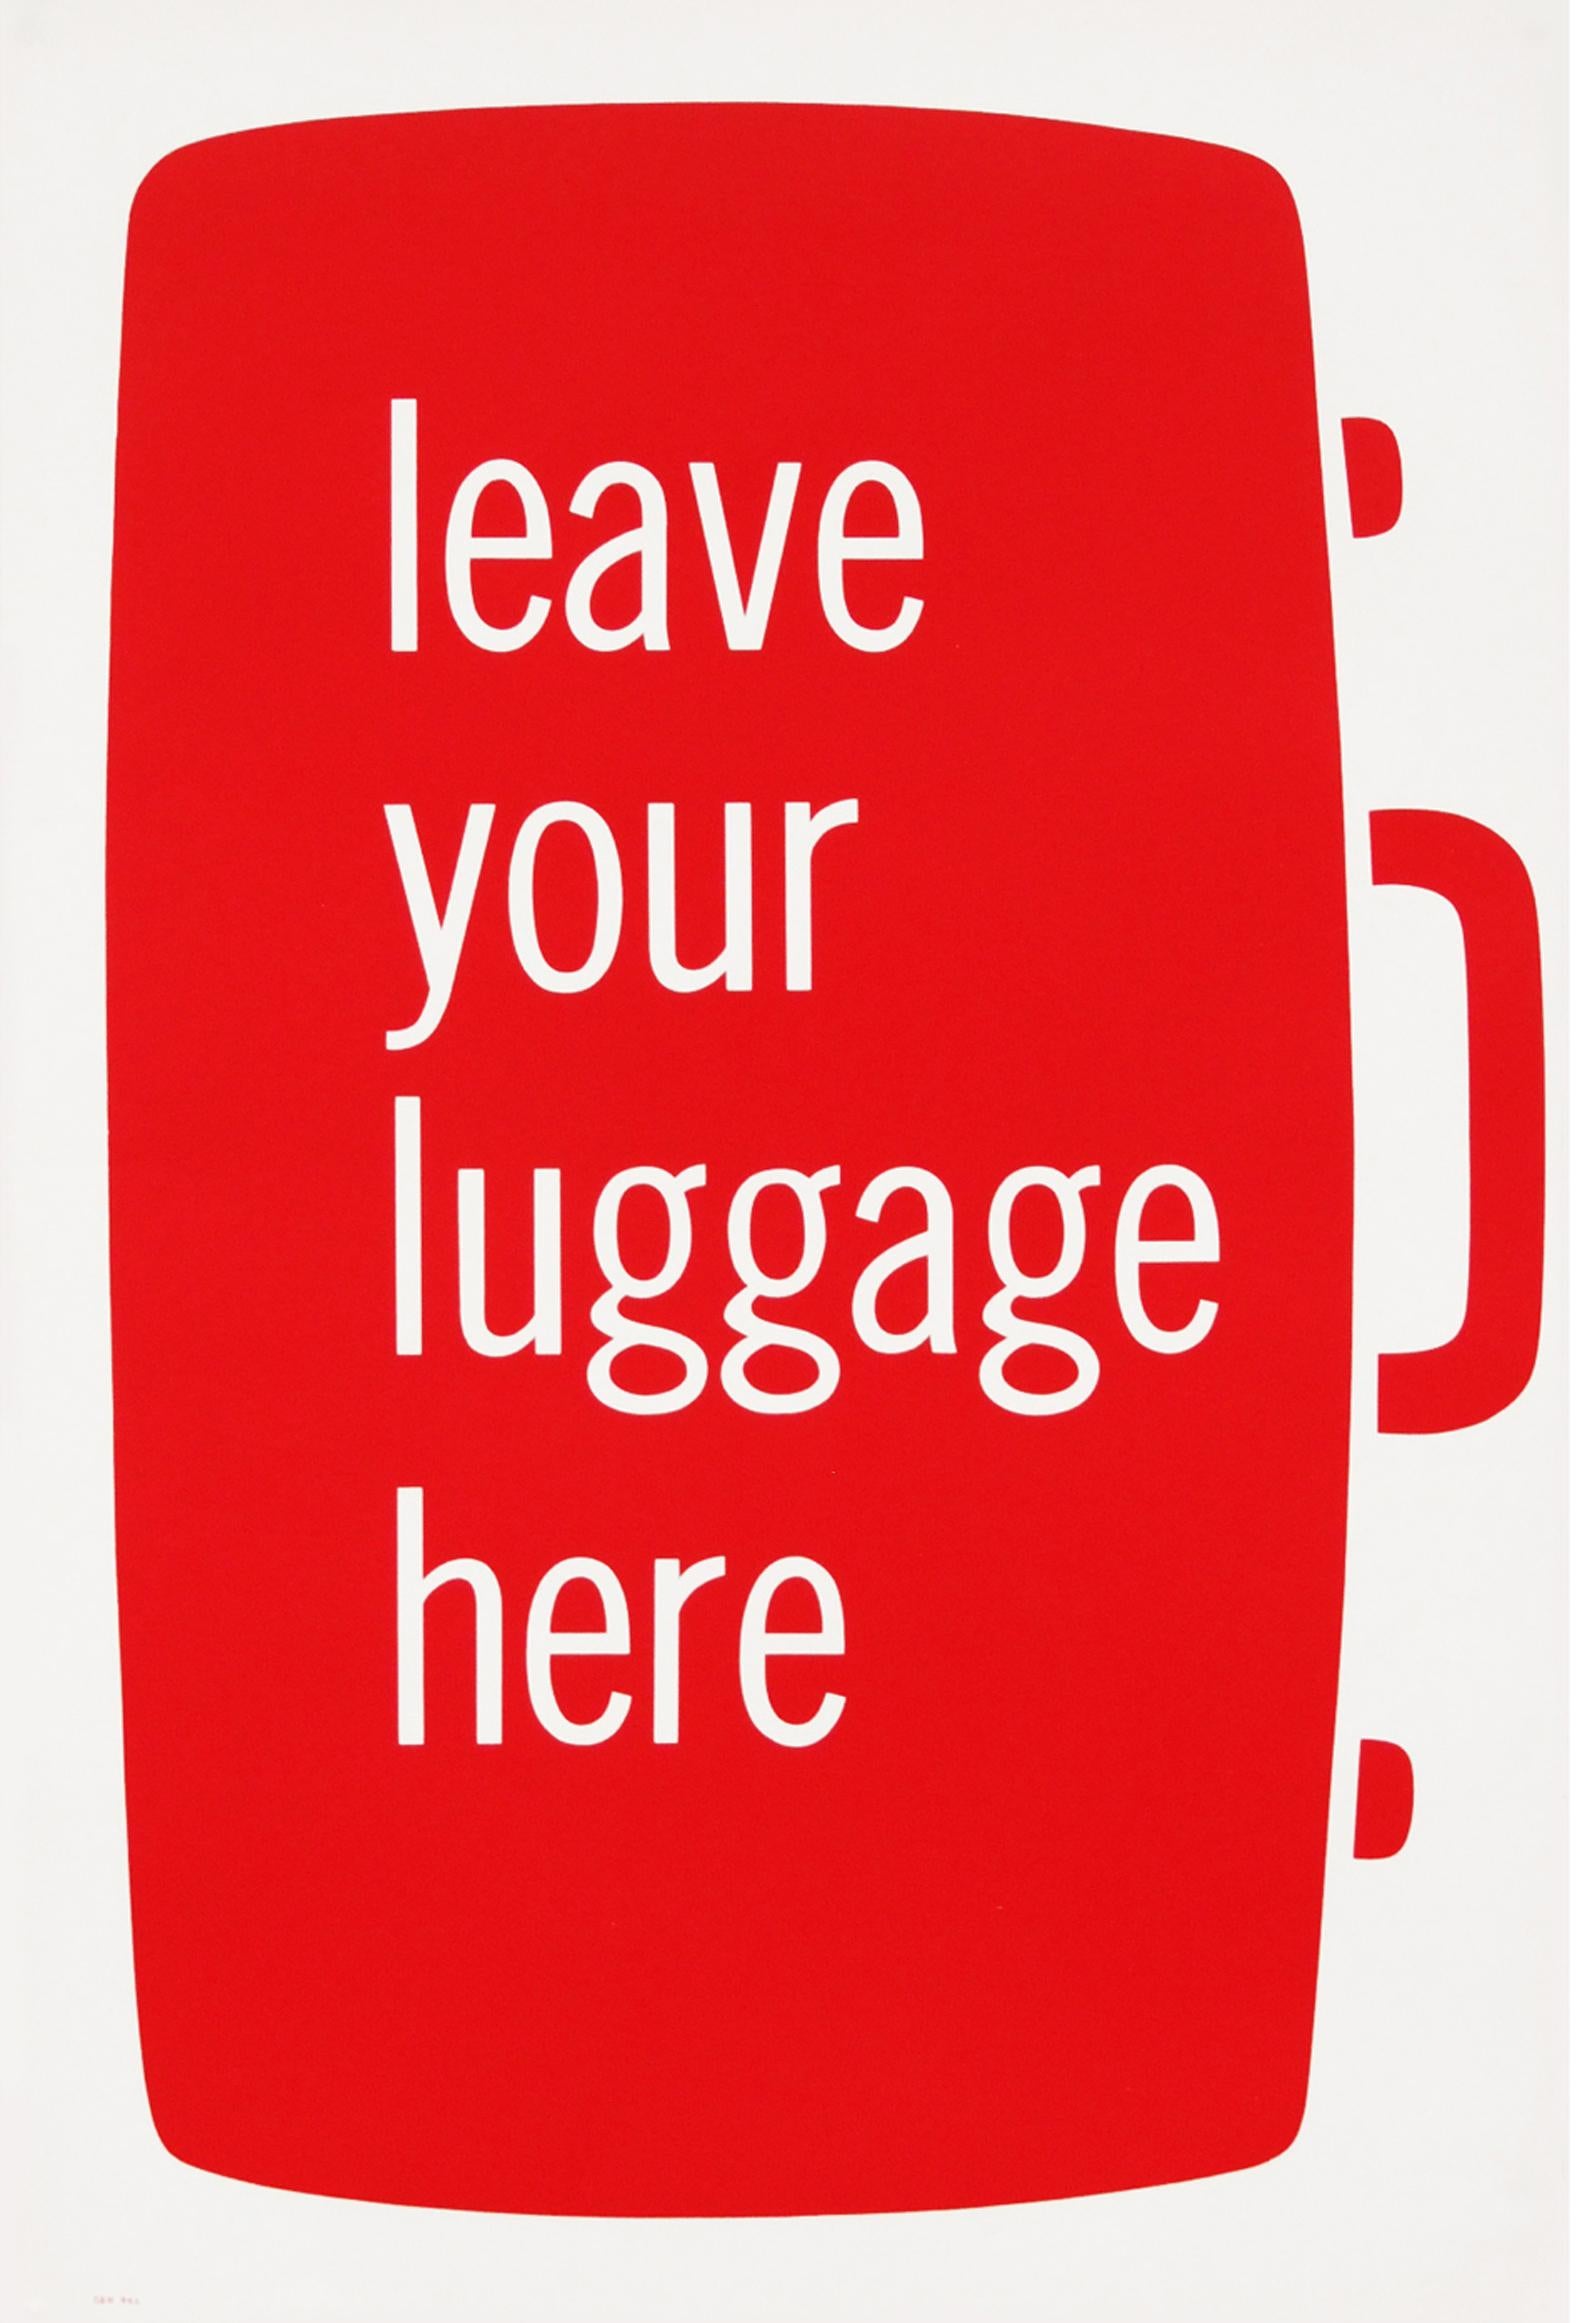 Rare original 1960s luggage information poster designed by Christopher Hill for British Transport, UK.

First edition color offset lithograph. Rolled.

Measures: L 76 cm x W 51 cm.